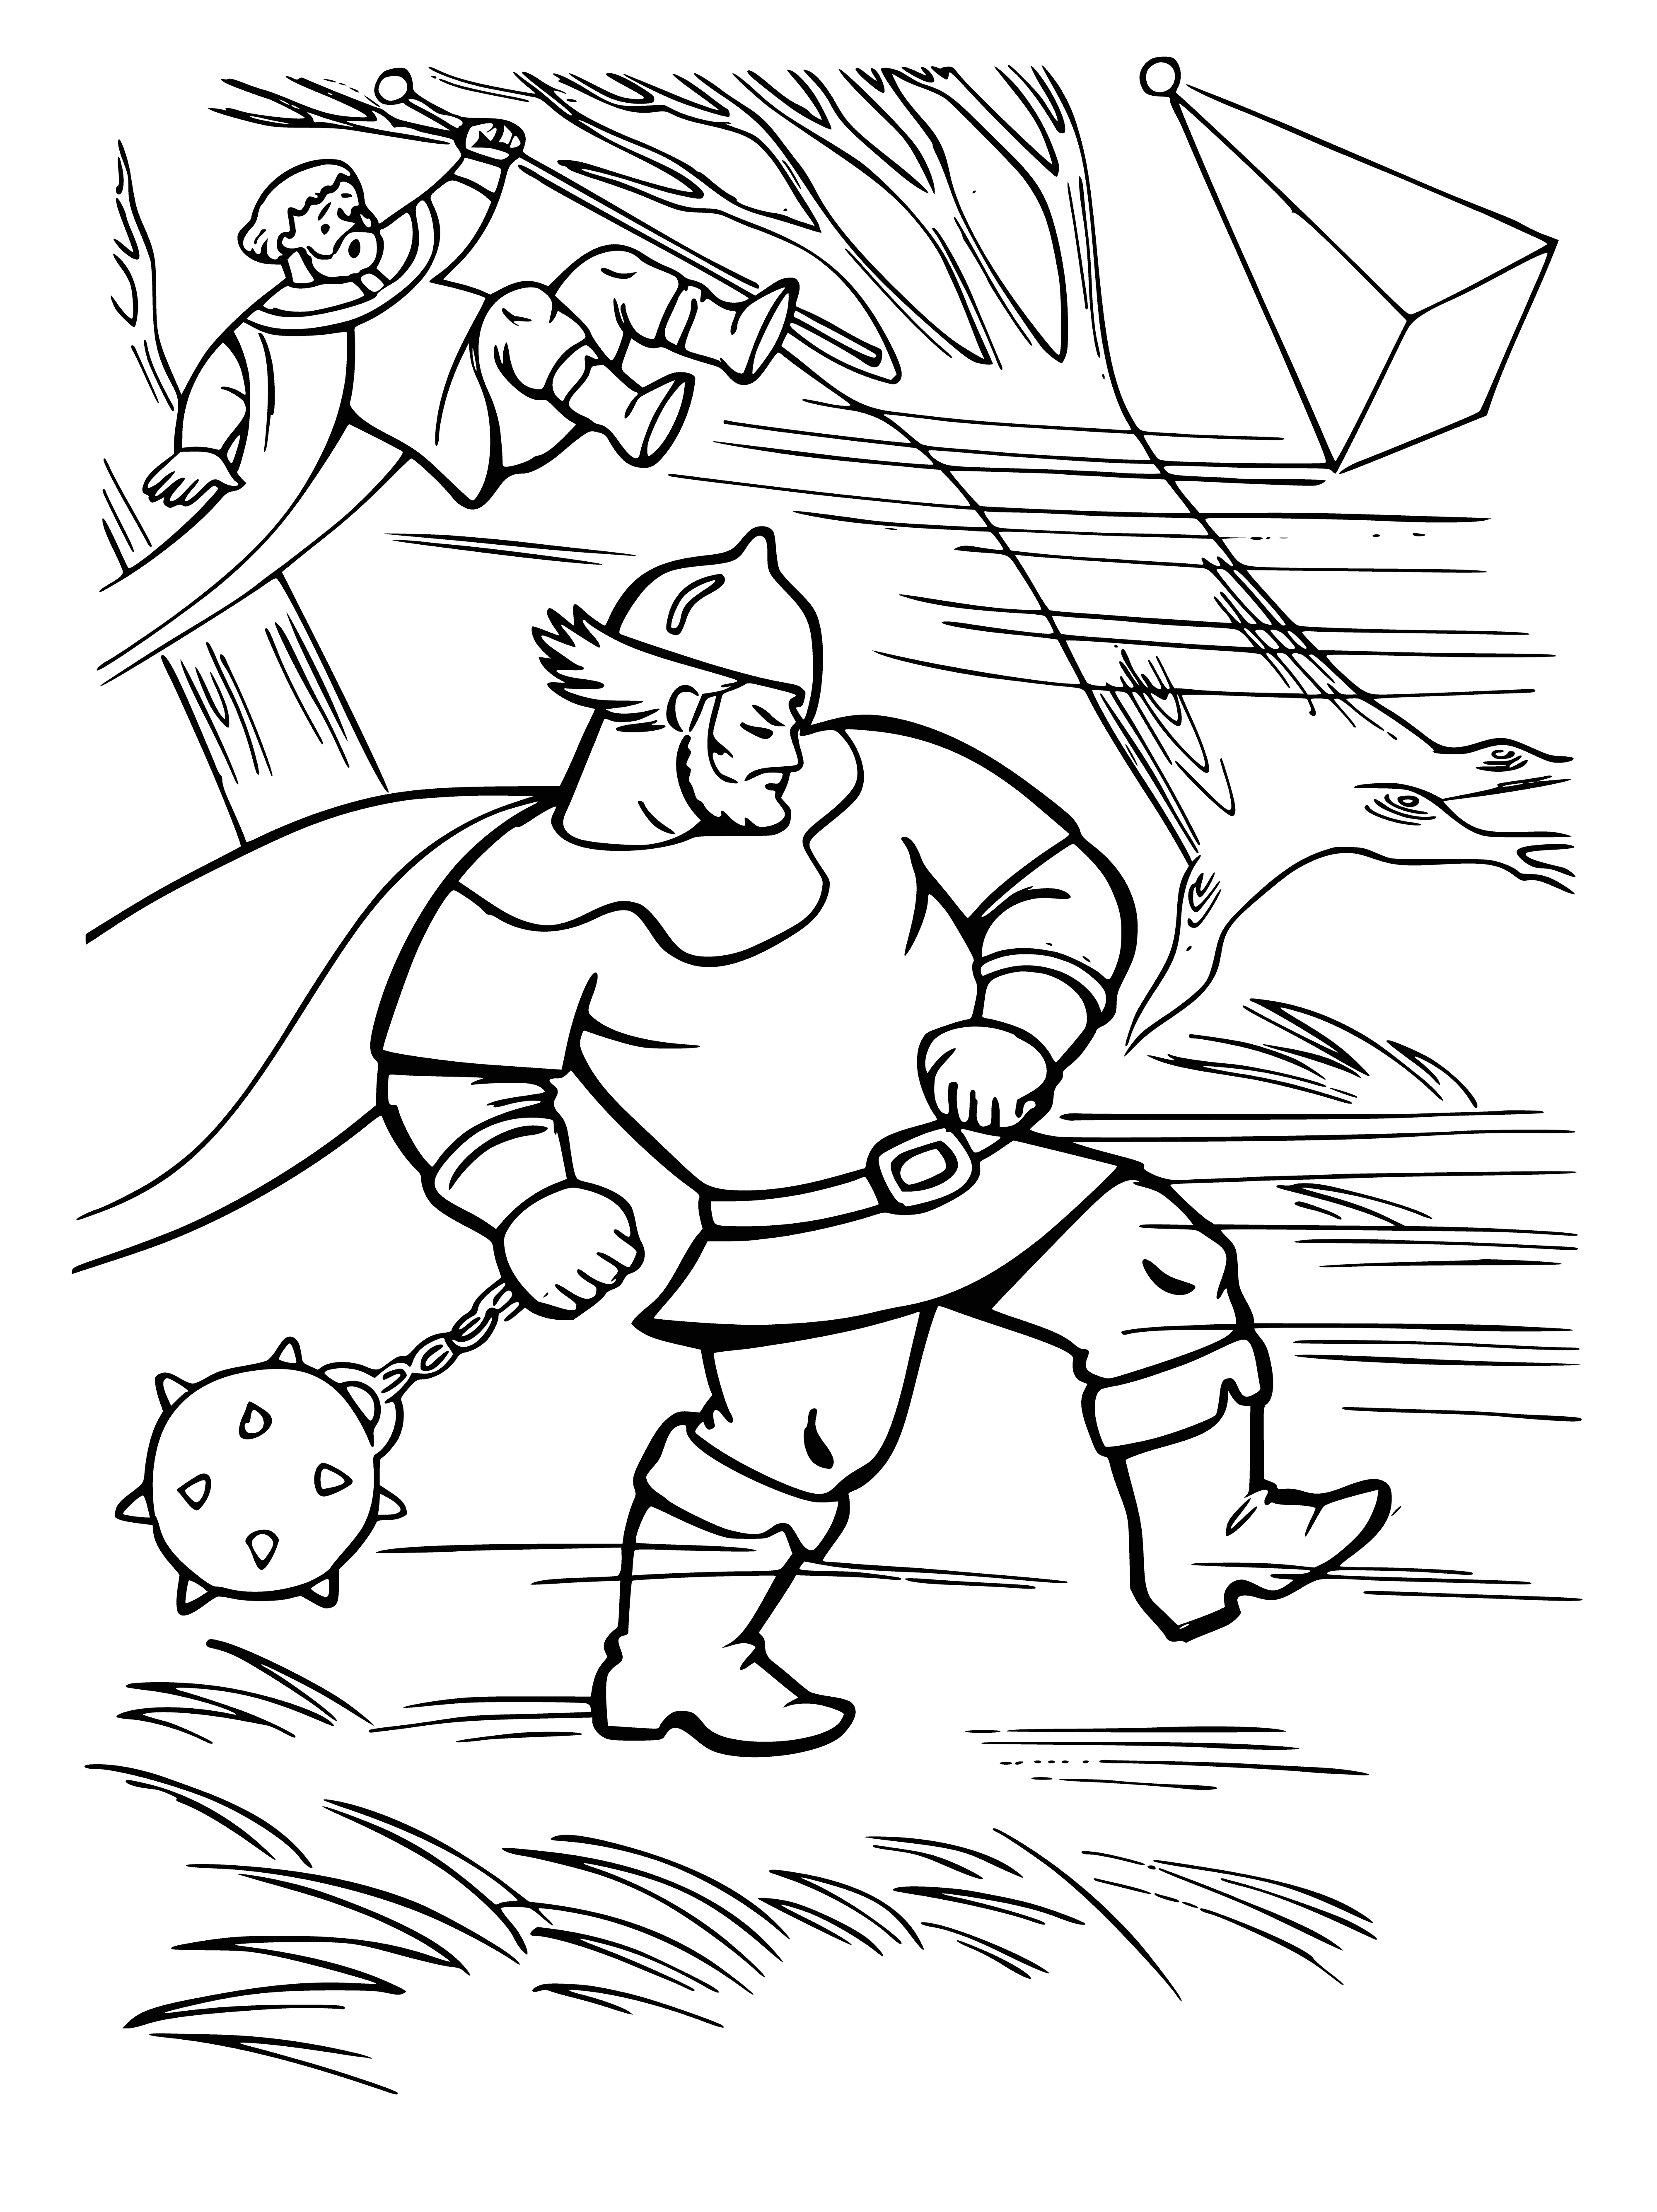 coloring page: 3 men in Russian clothes stand in snow w/ axes, 1 blowing a whistle, waiting for something.